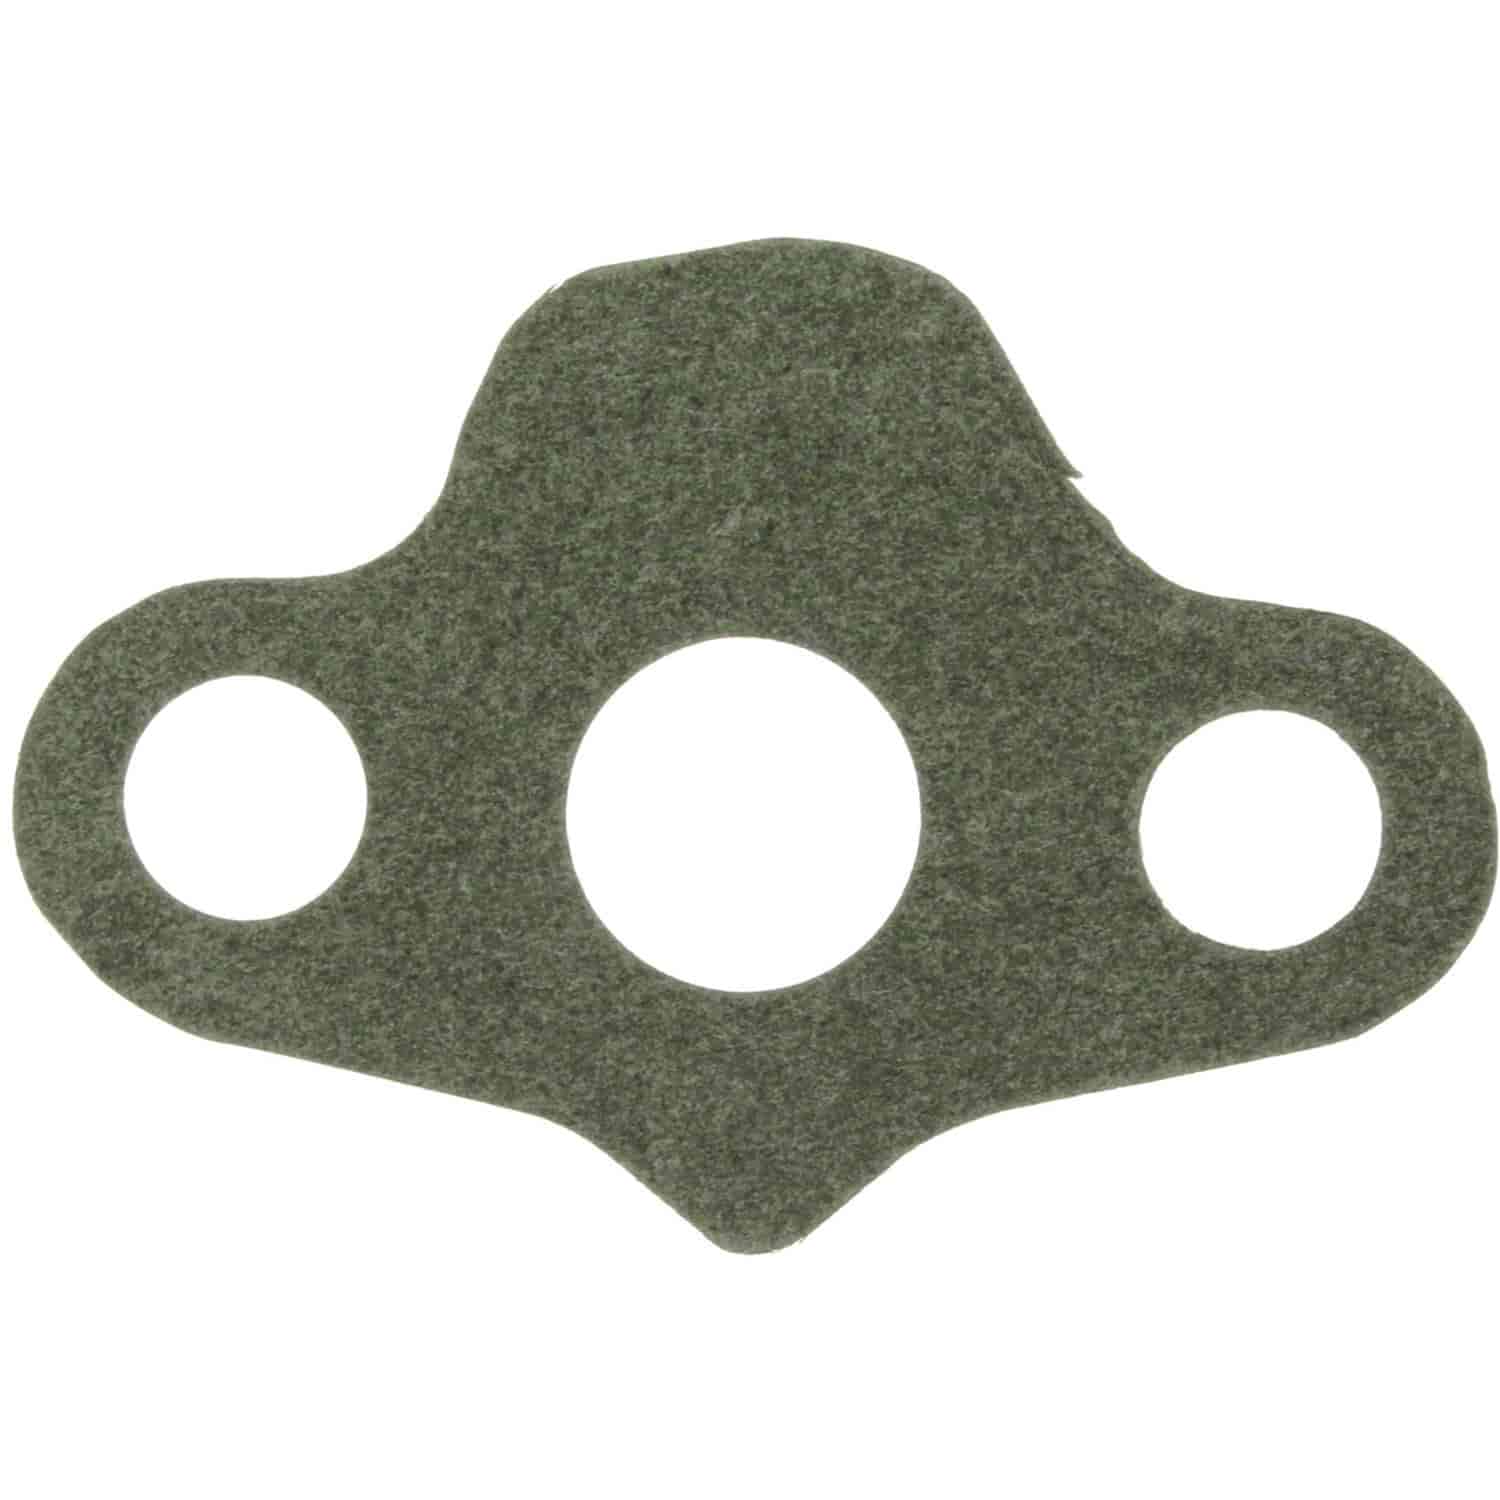 Oil Pump Gasket Ford 1962-1985 Small Block Ford 221/260/289/302